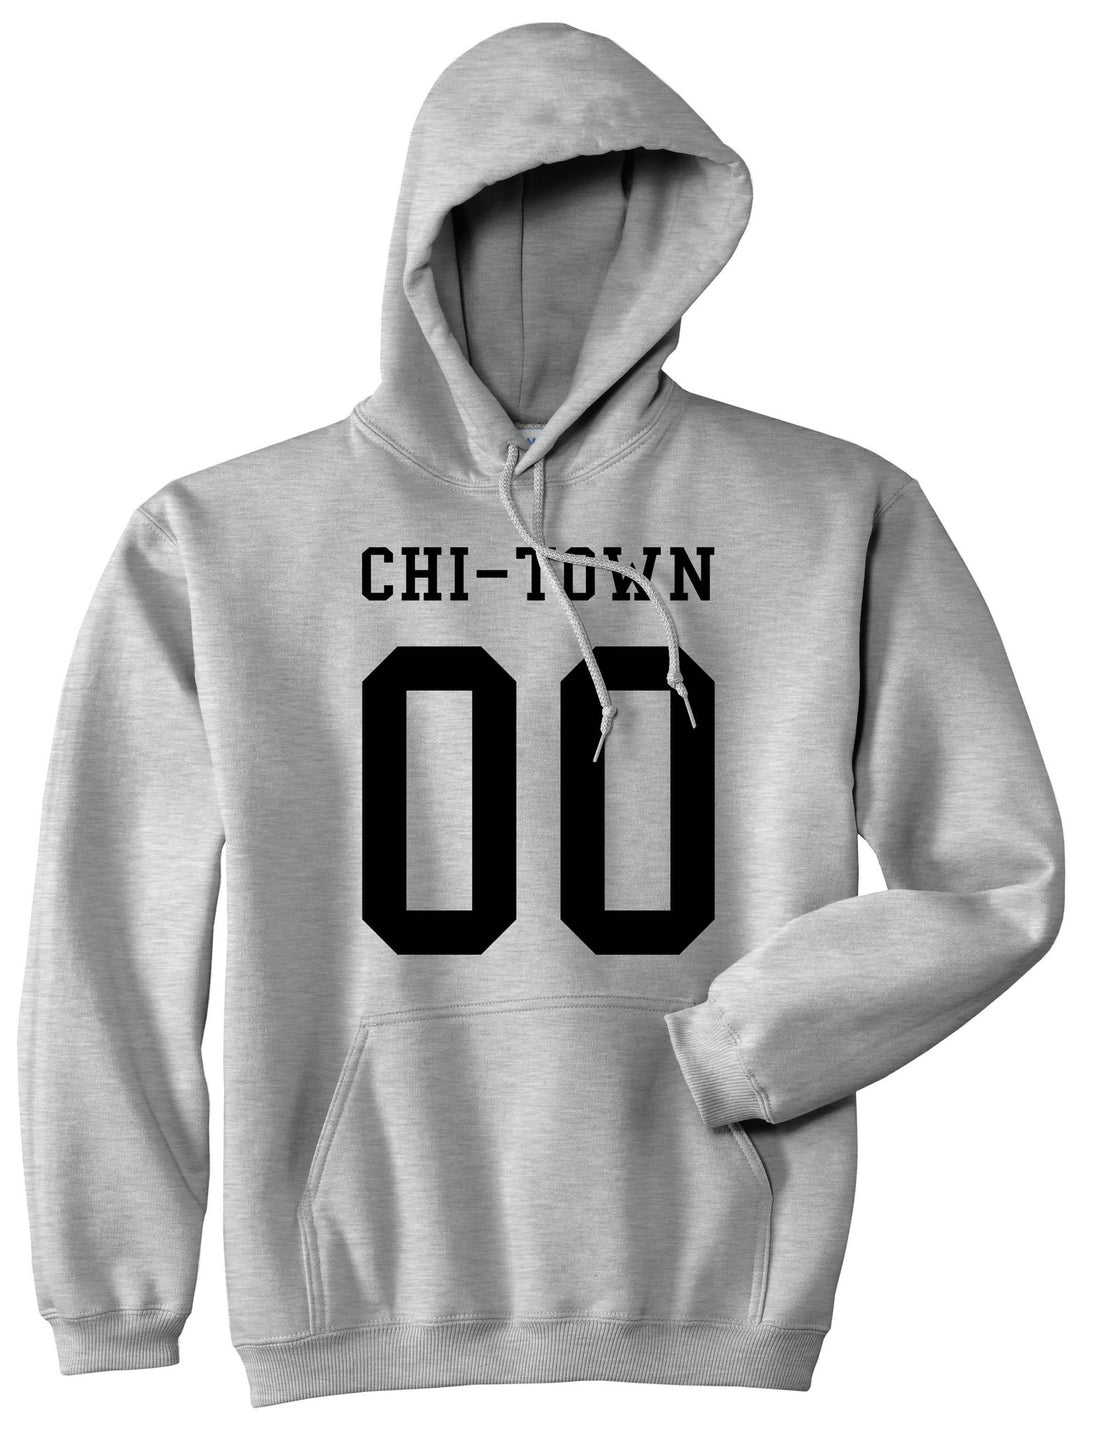 Chitown Team 00 Chicago Jersey Pullover Hoodie in Grey By Kings Of NY